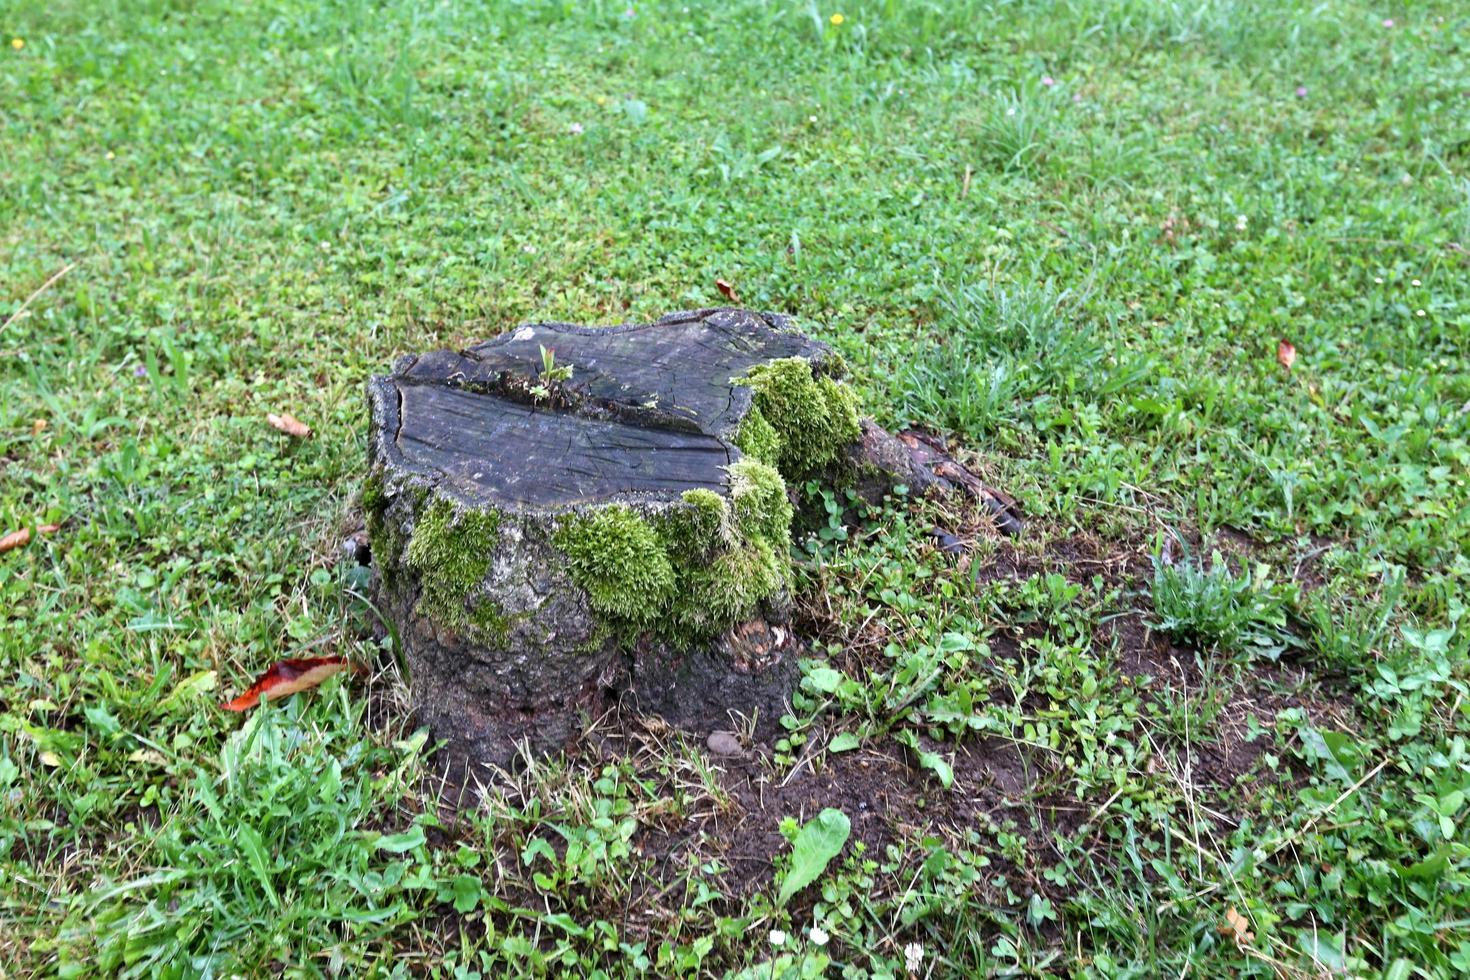 Old and rotten stump in the city park photo